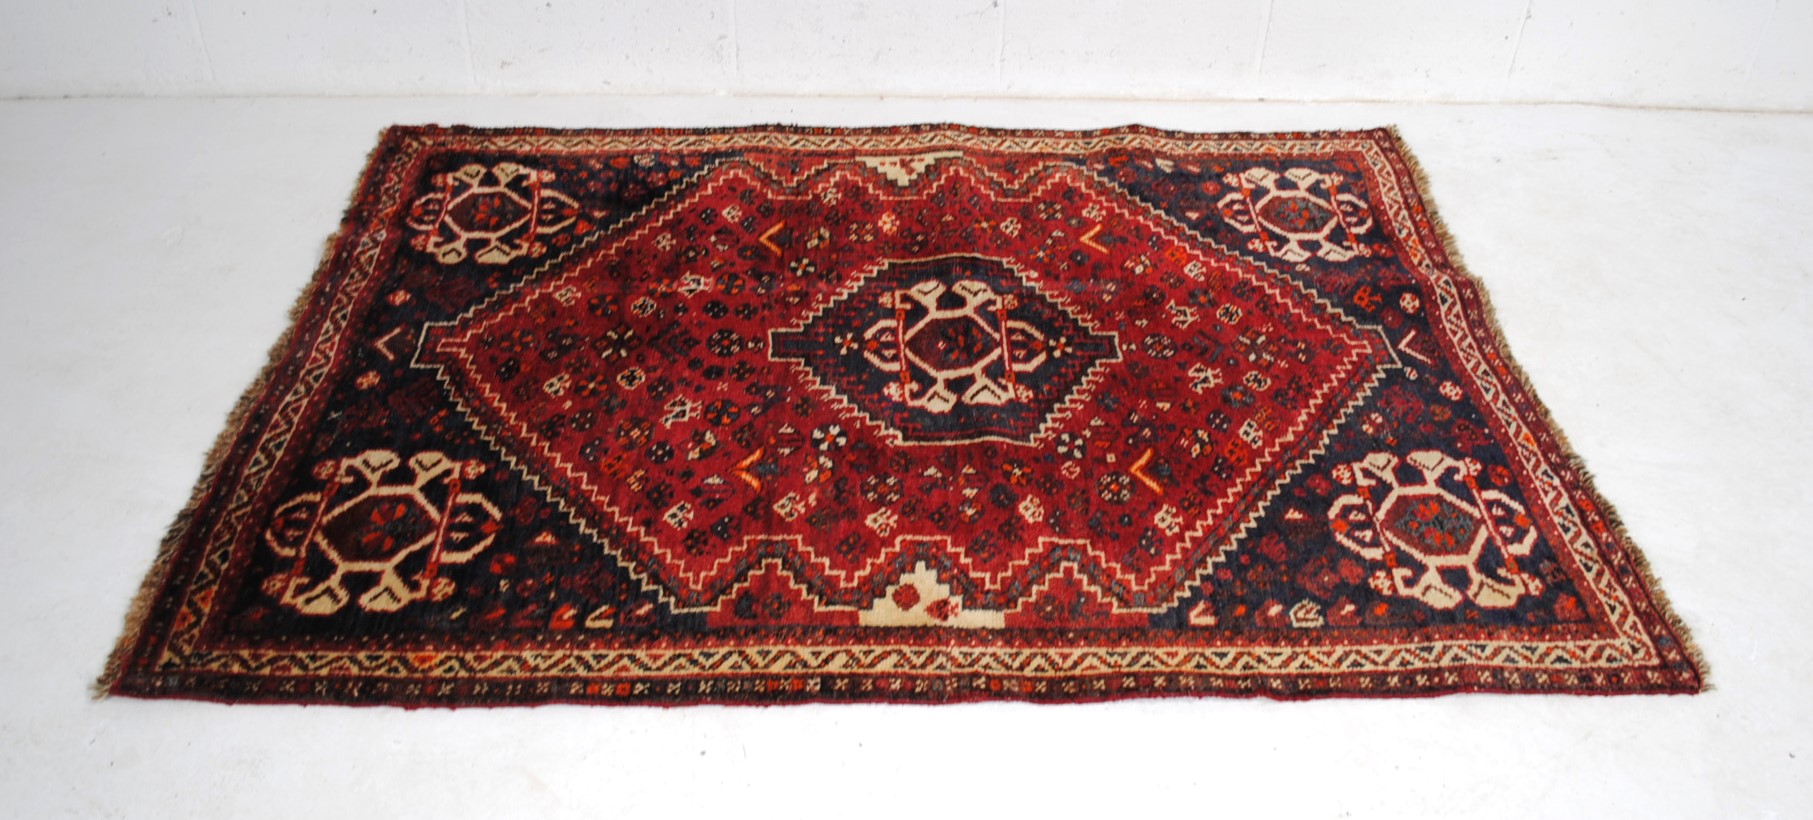 An Eastern red ground rug, with traditional designs - 173cm x 123cm - Image 2 of 8